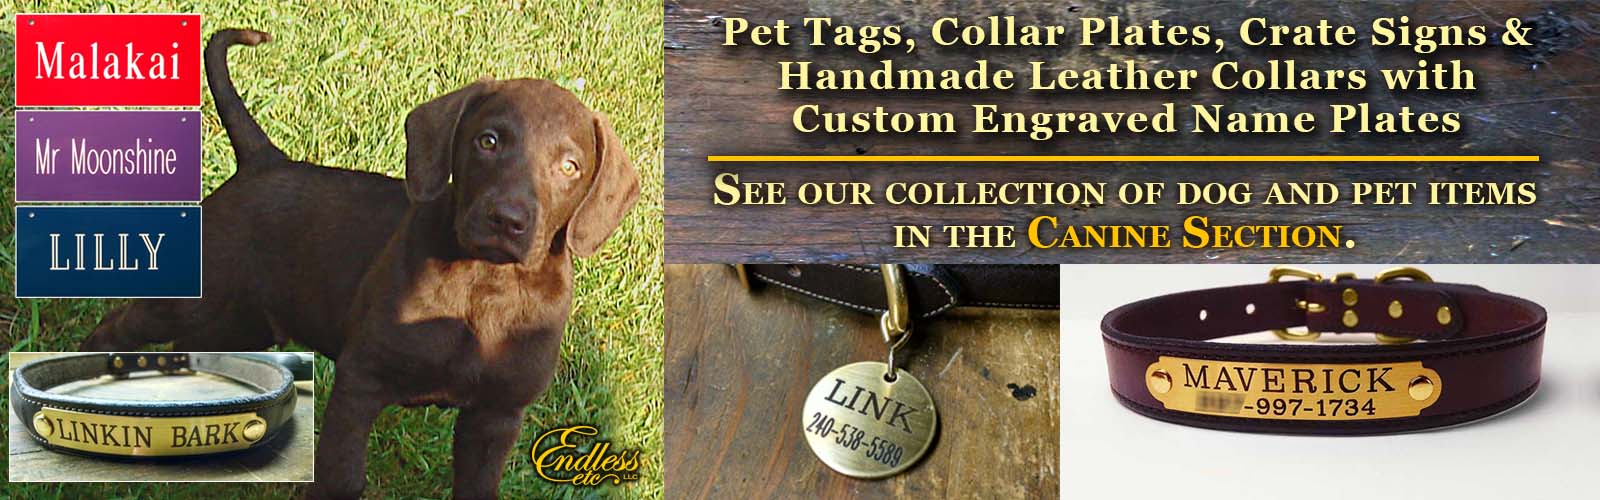 engraved collar and pet tags